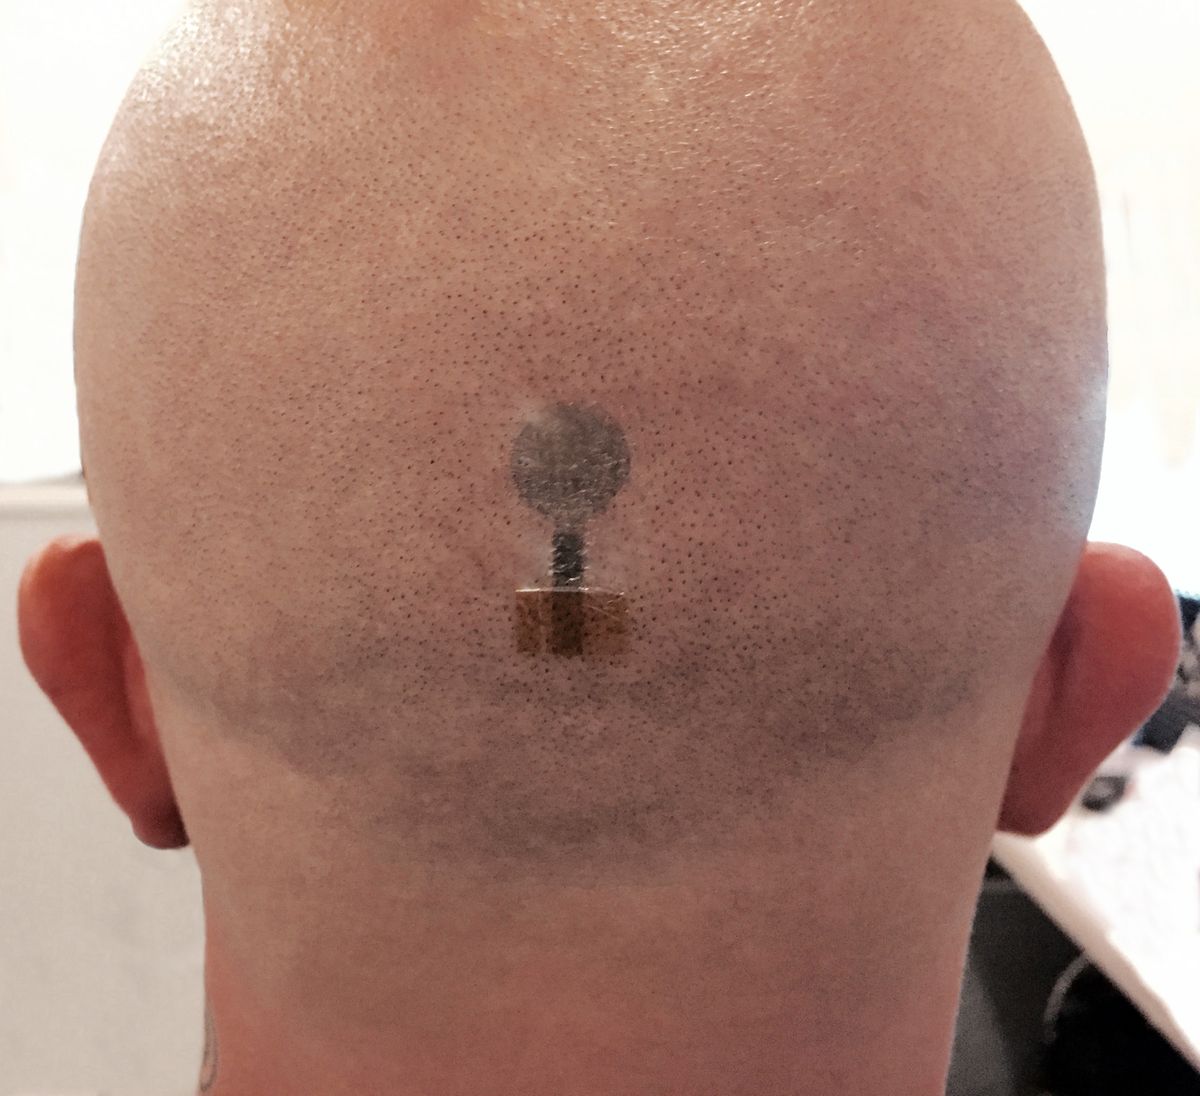 the back of a man's head with a tattoo electrode